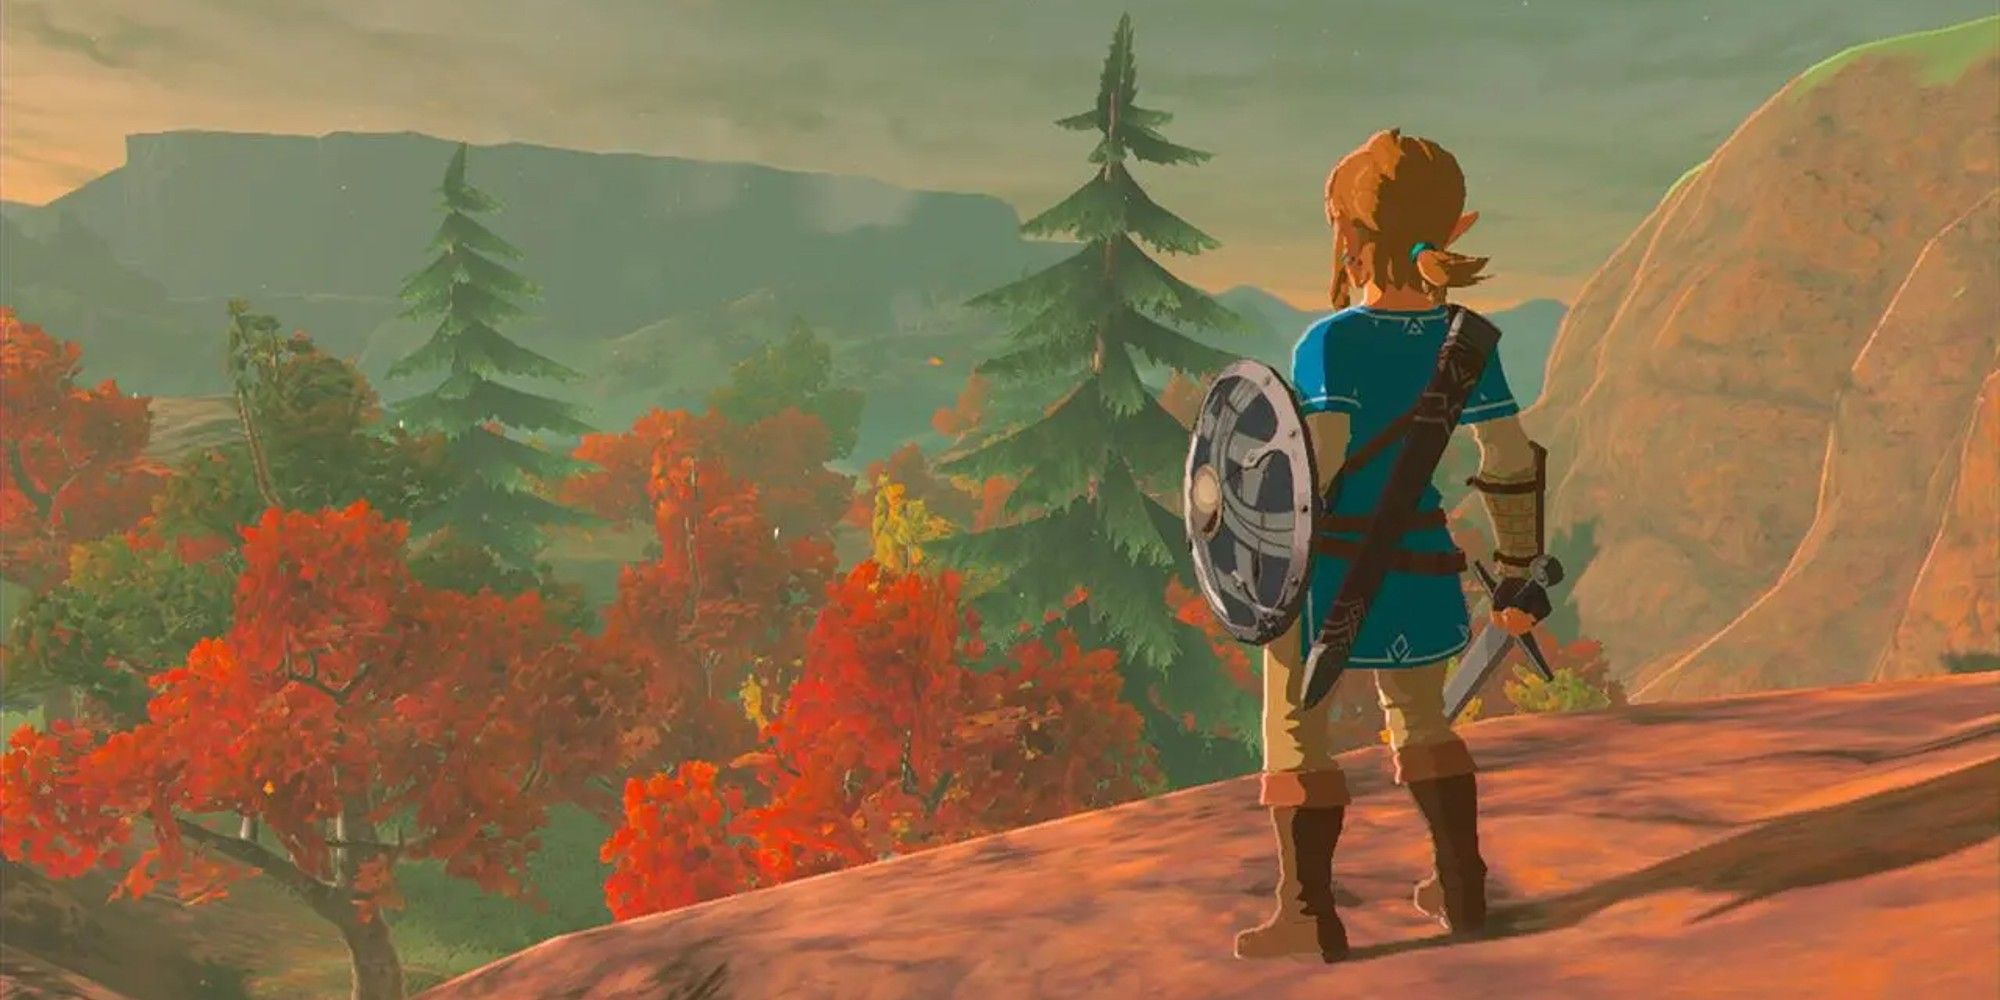 Legend of Zelda: Breath of the Wild - Link looks out at scenery full of autumn colours